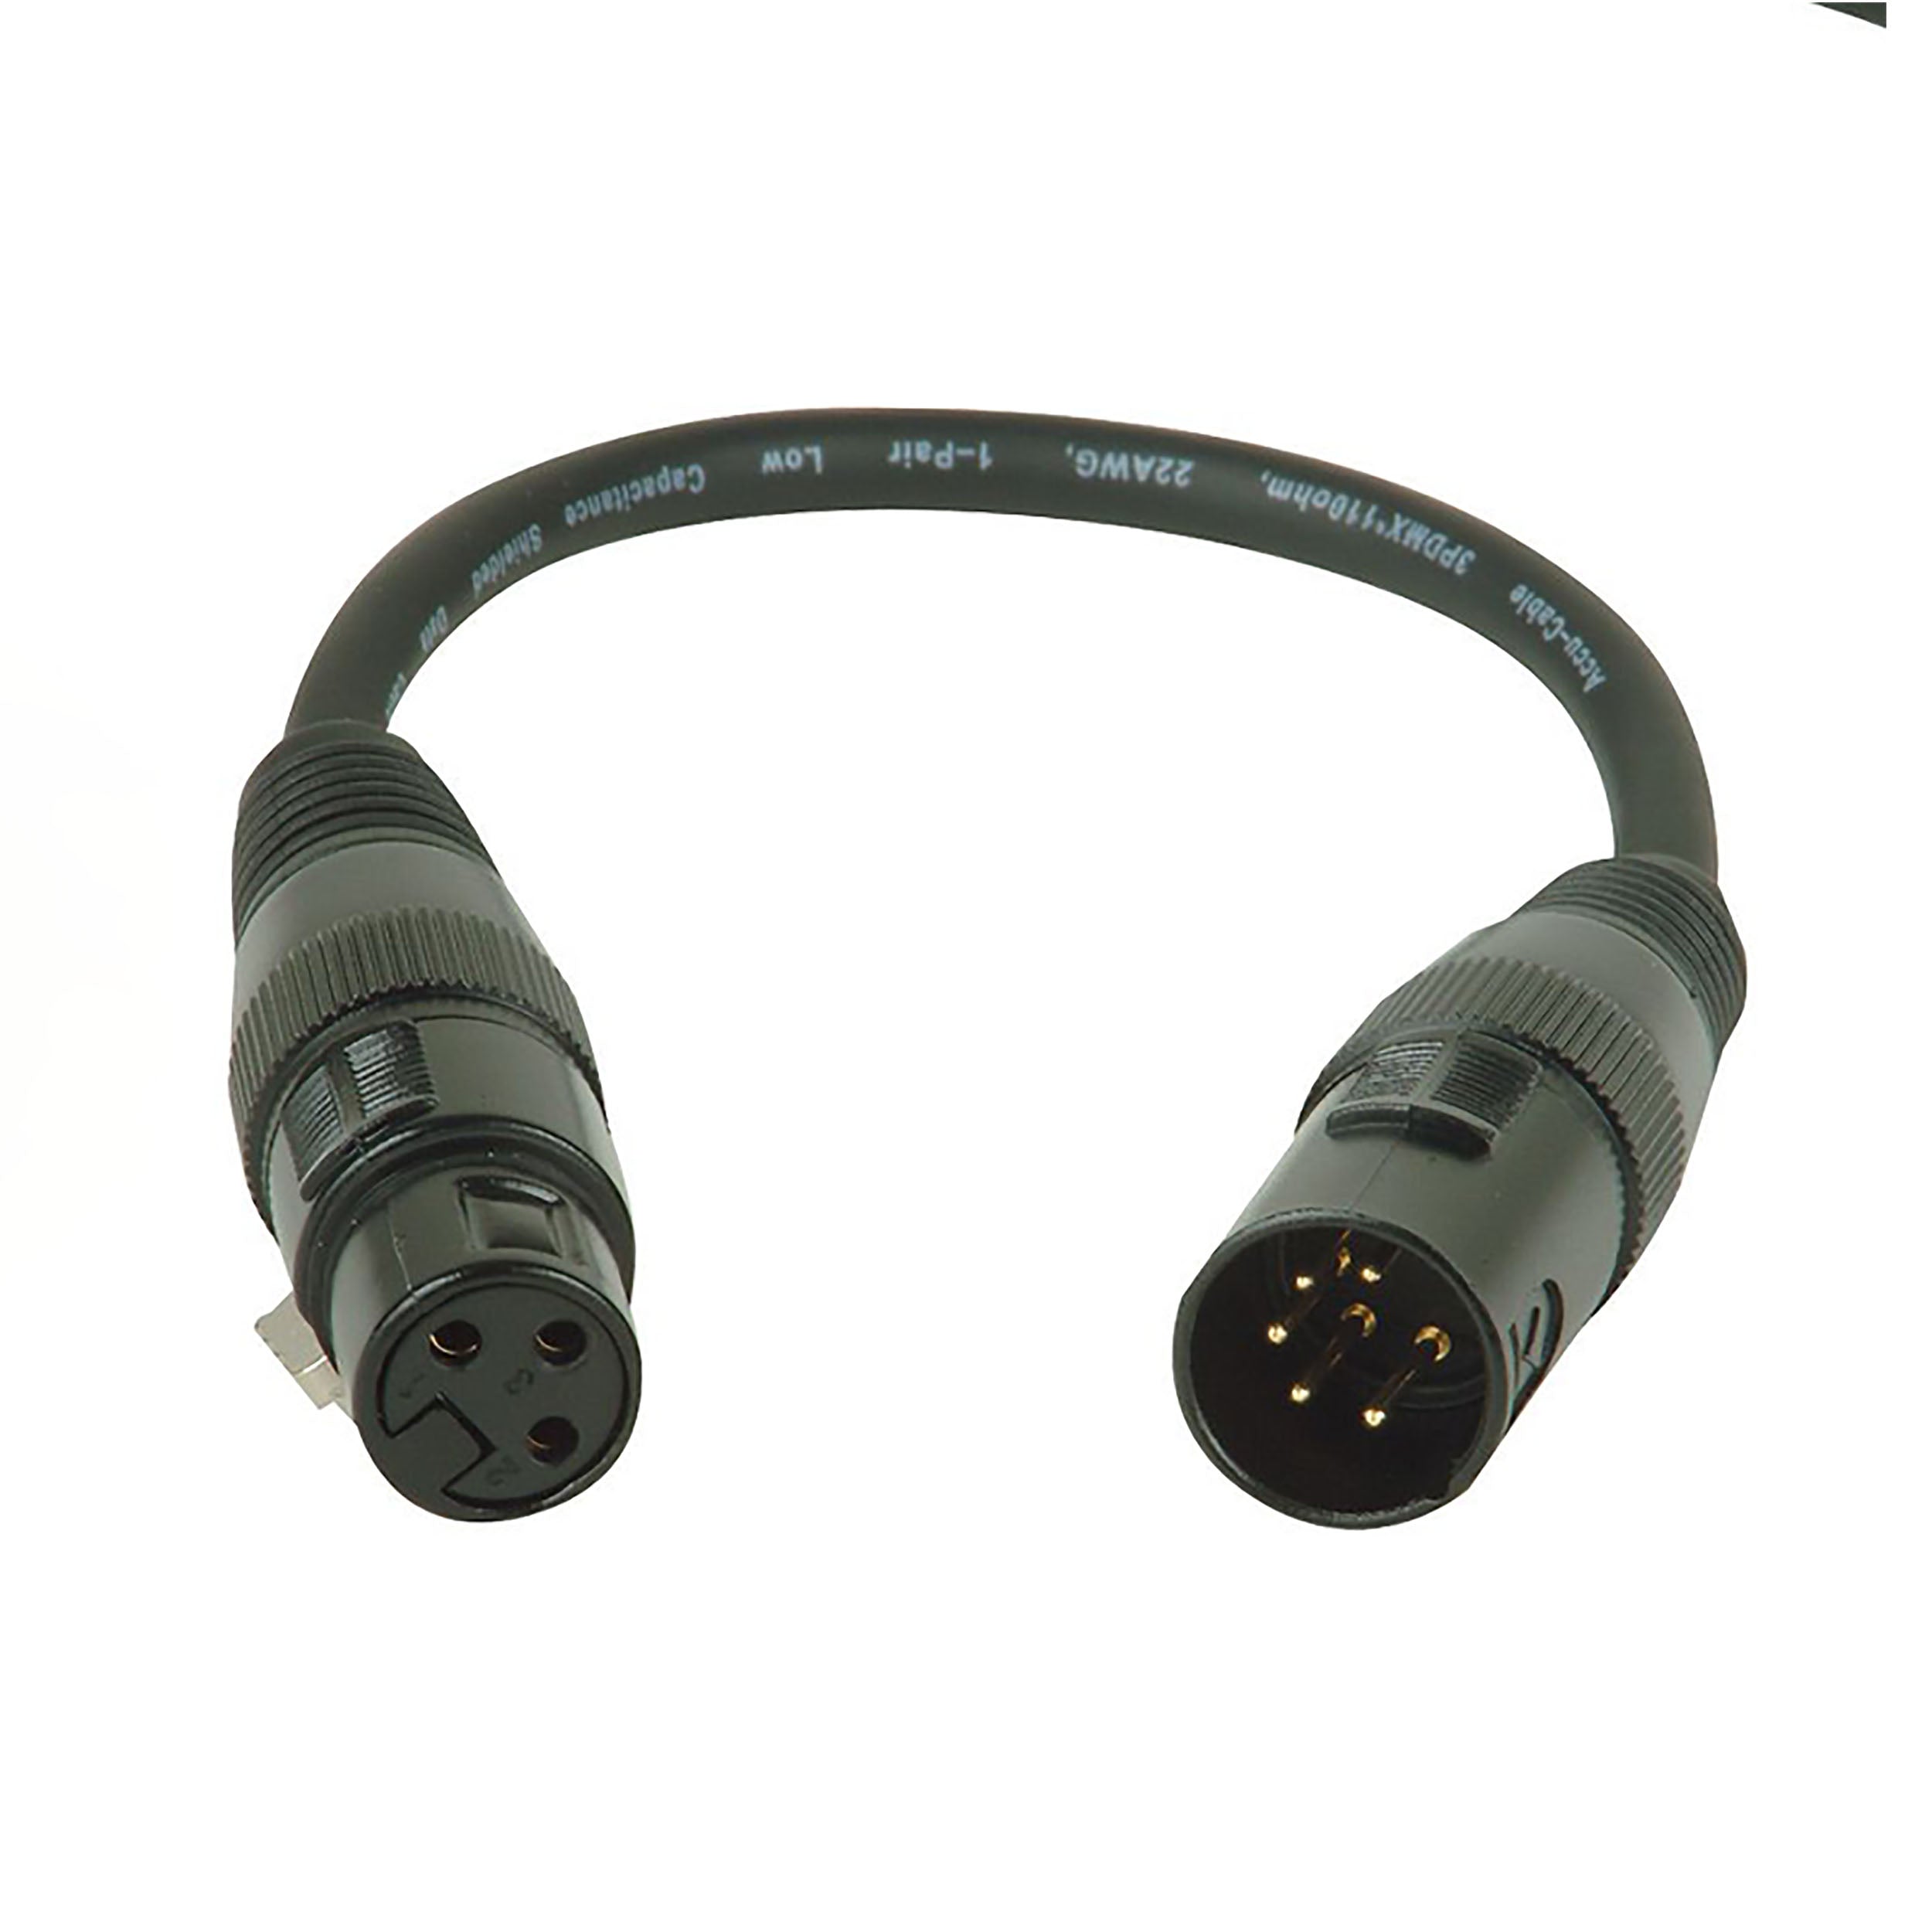 Accu-Cable AC5PM3PFM, 3-Pin DMX Female to 5-Pin DMX Male Adapter Cable by Accu Cable